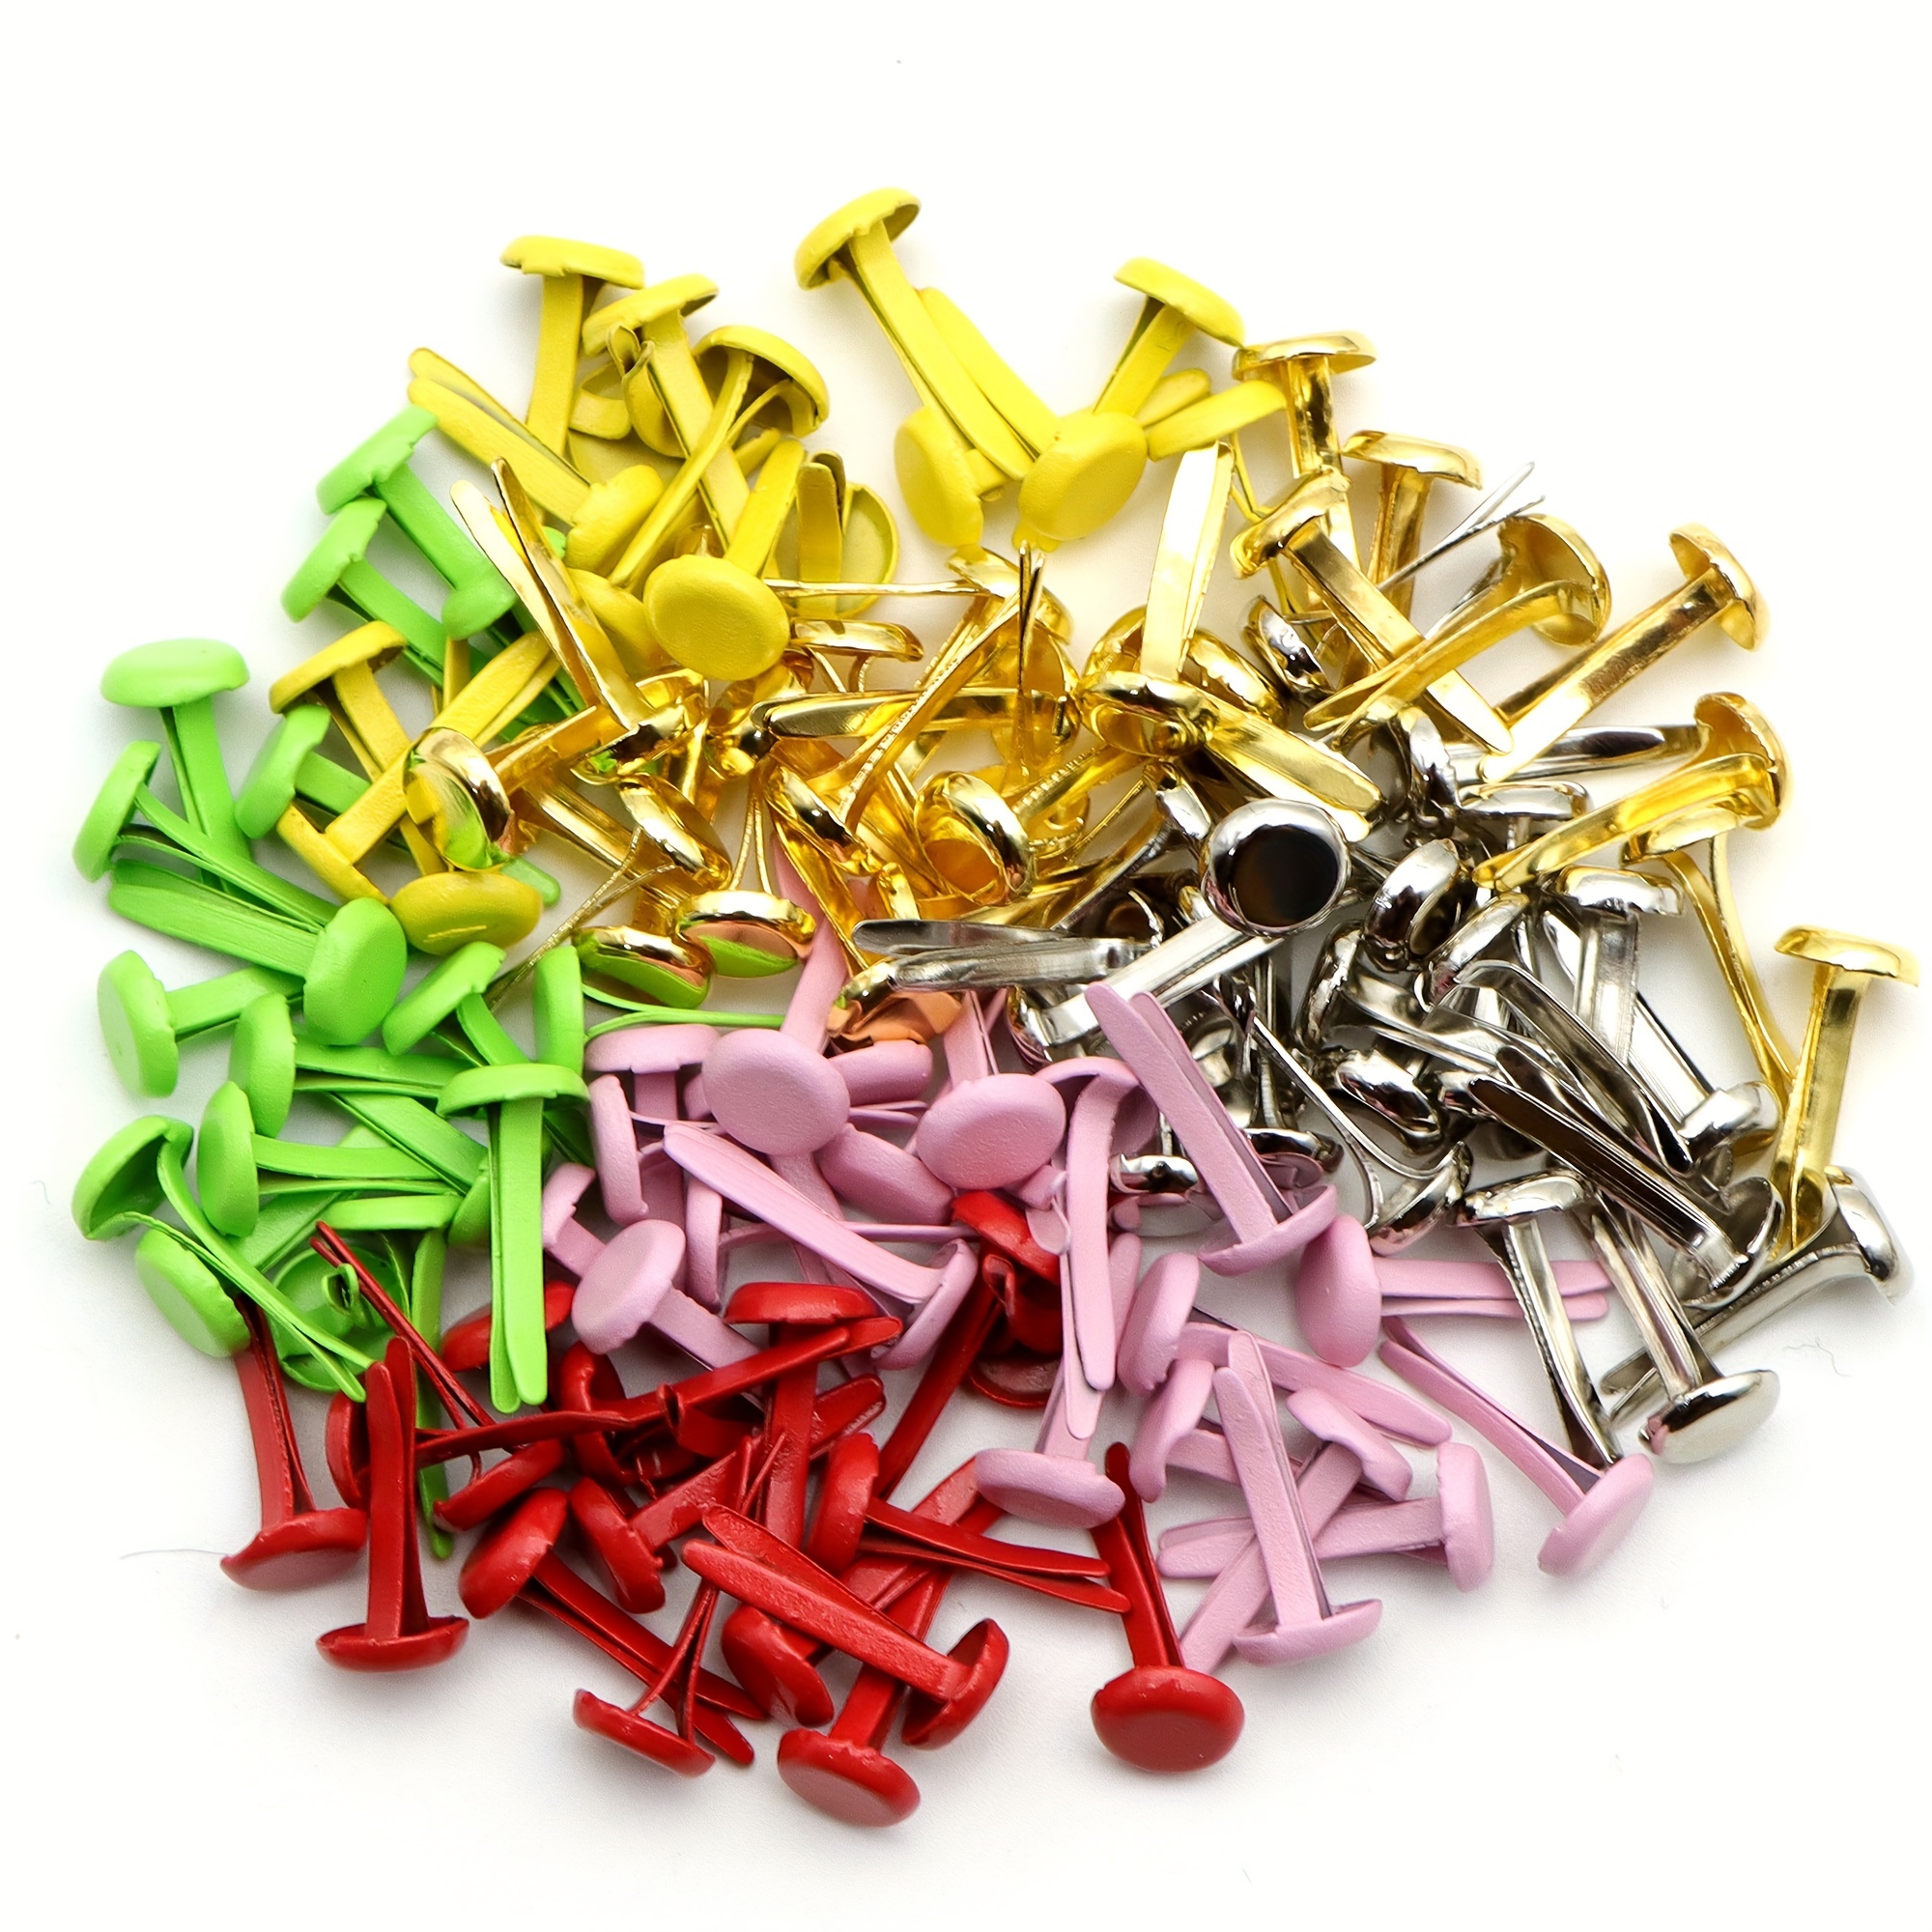 50Pcs Metal Paper Fasteners Handmade Stamping Decoration Heart Shaped Mini  Brads DIY Crafts for Home Decor